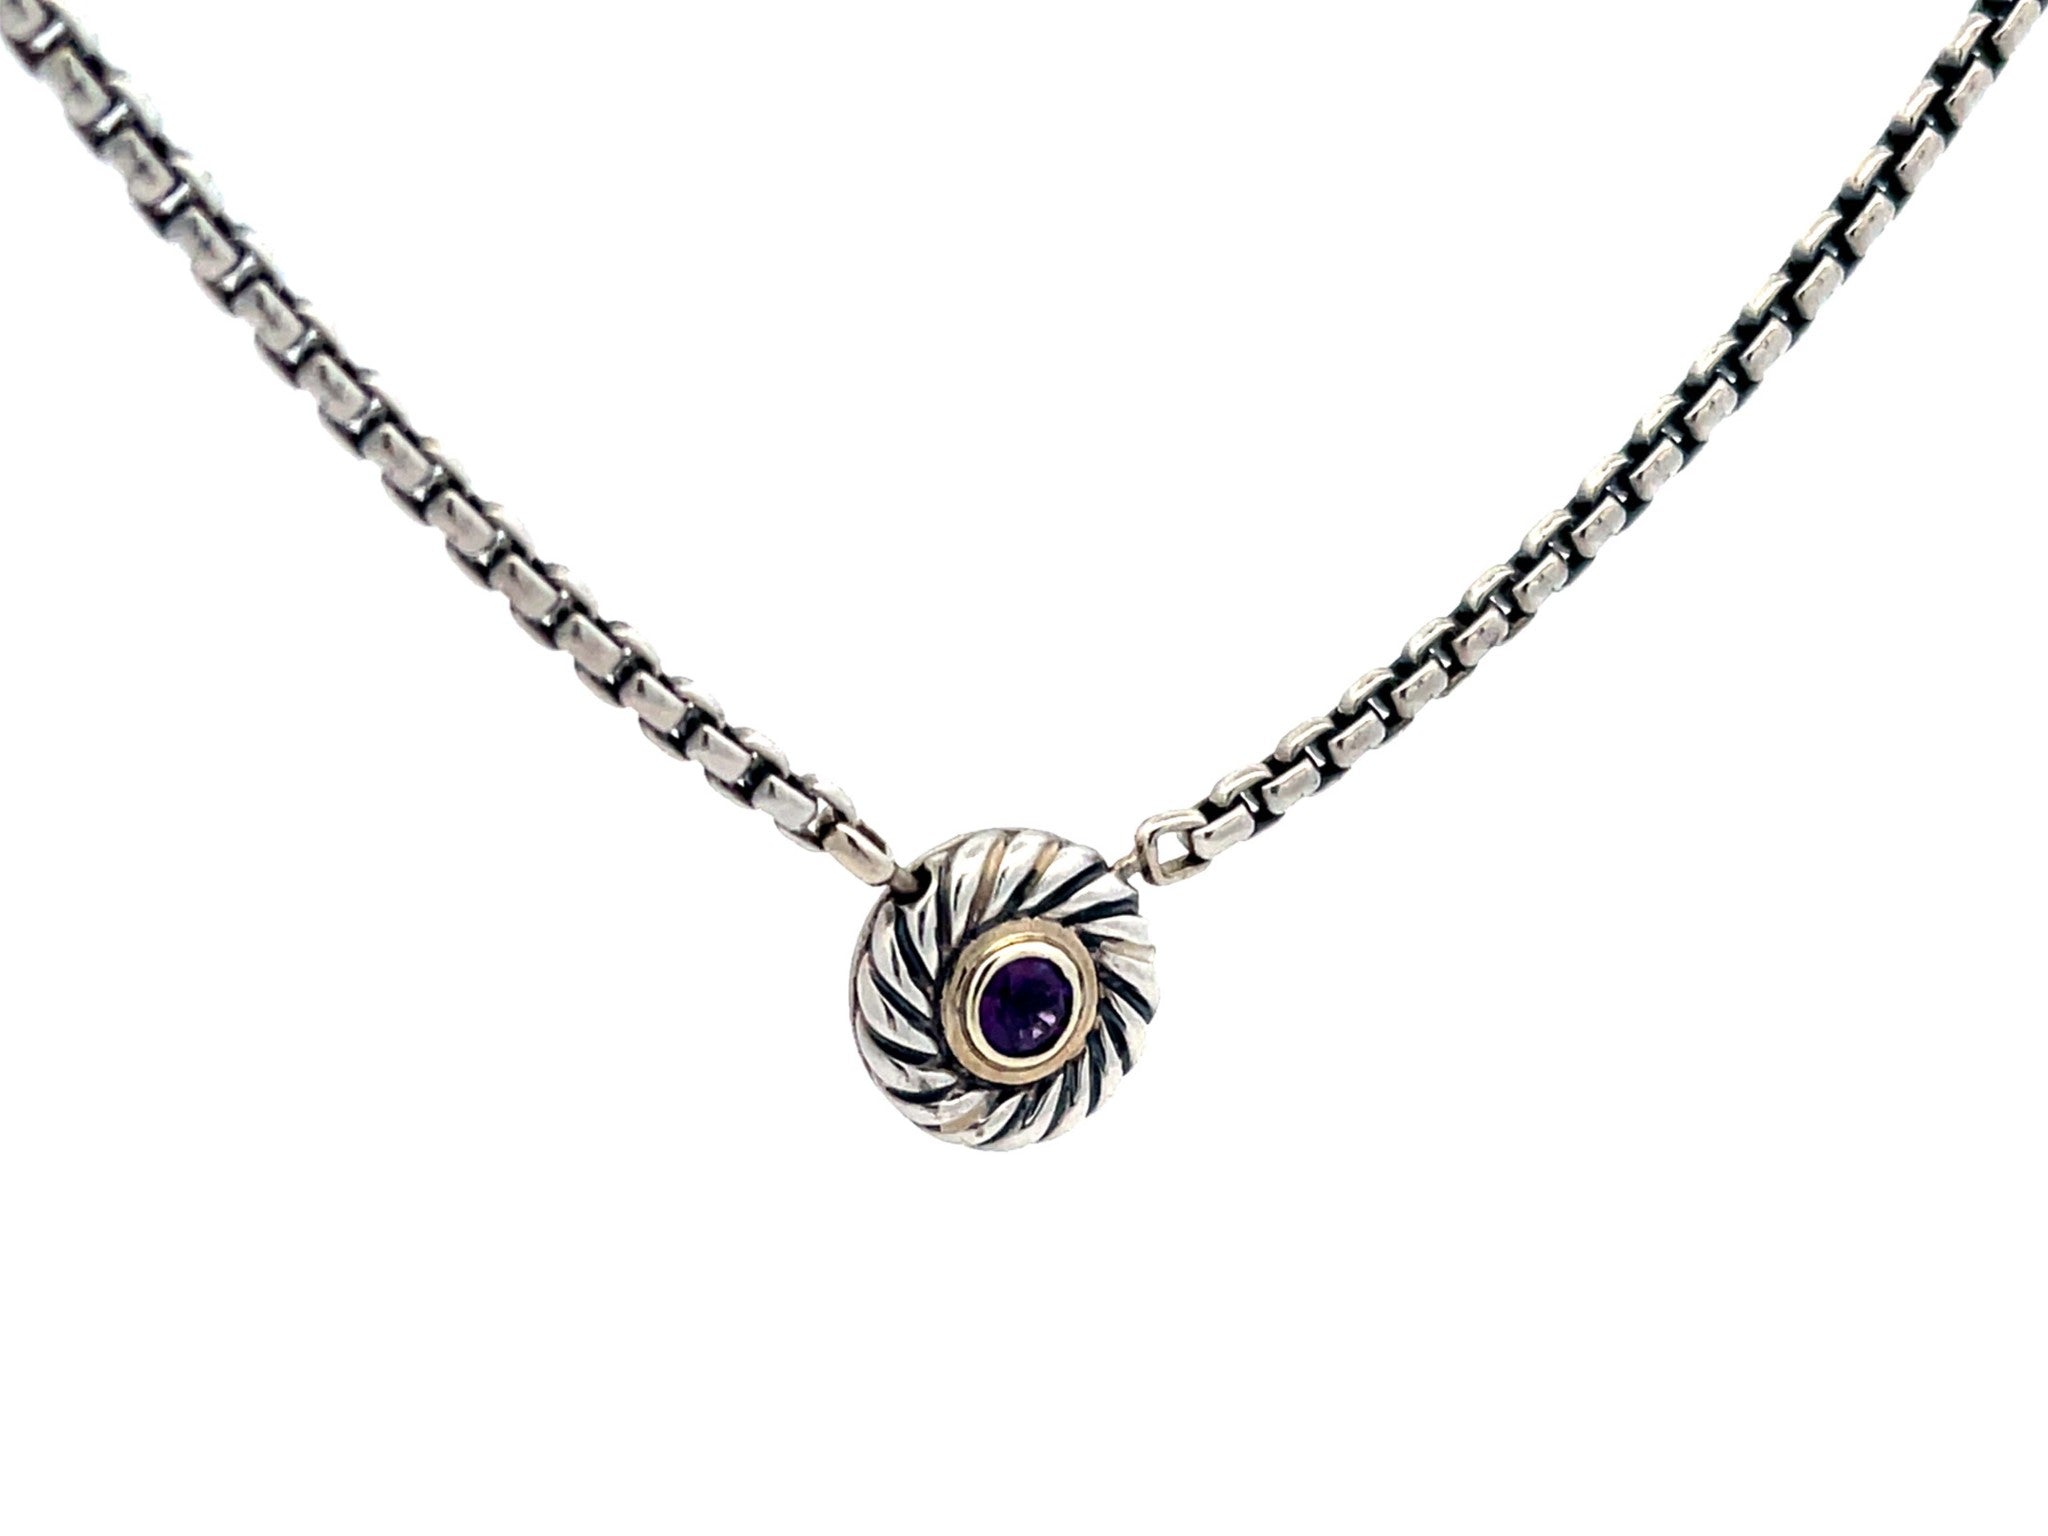 David Yurman Cable Classics Necklace in Sterling Silver with Amethyst and 14K